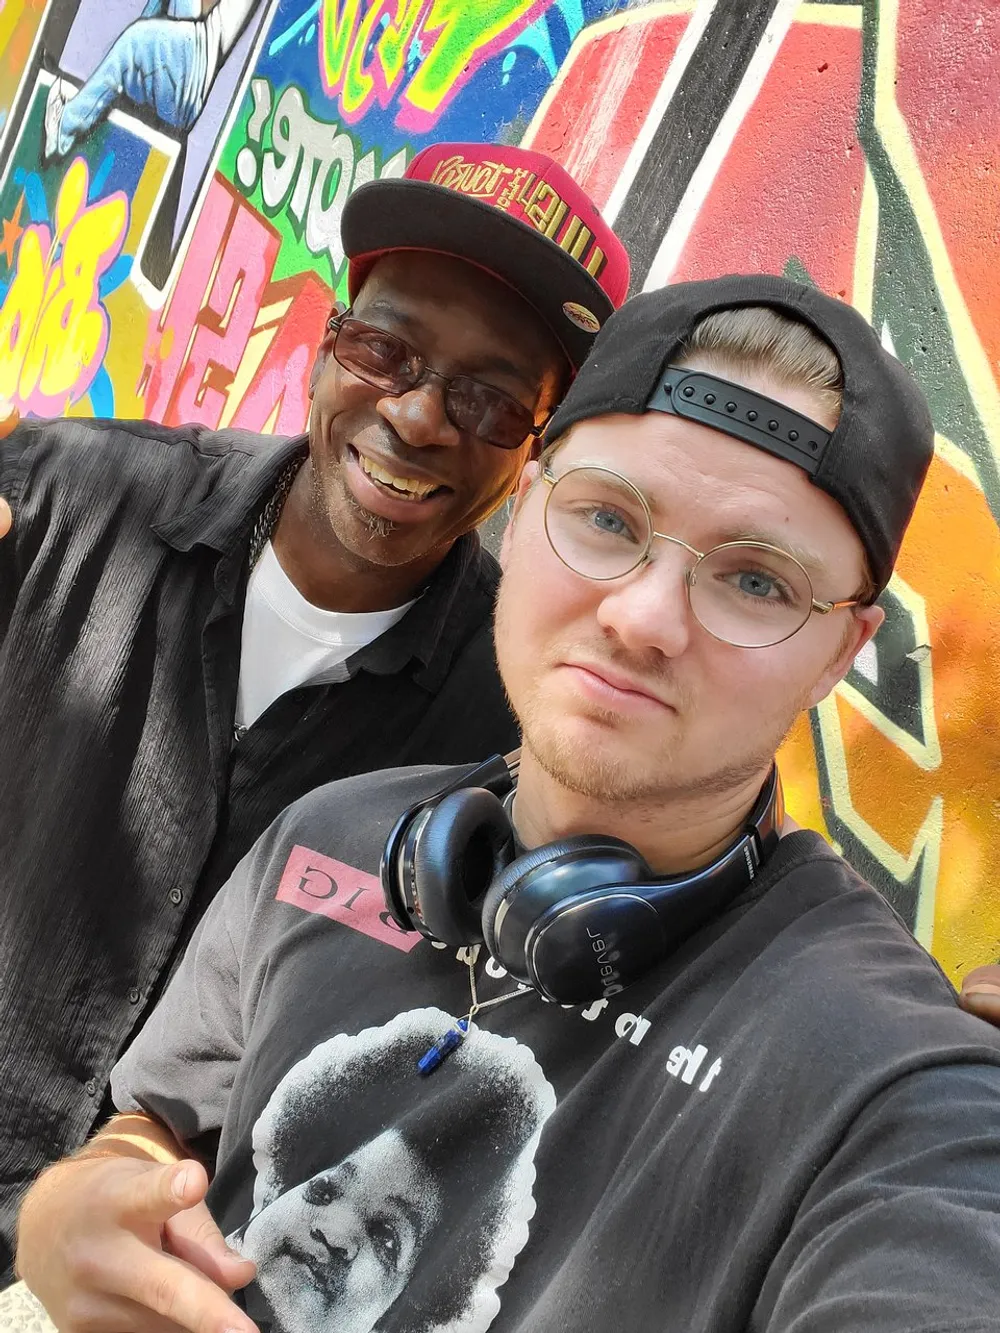 Two smiling men are taking a selfie in front of a colorful graffiti wall